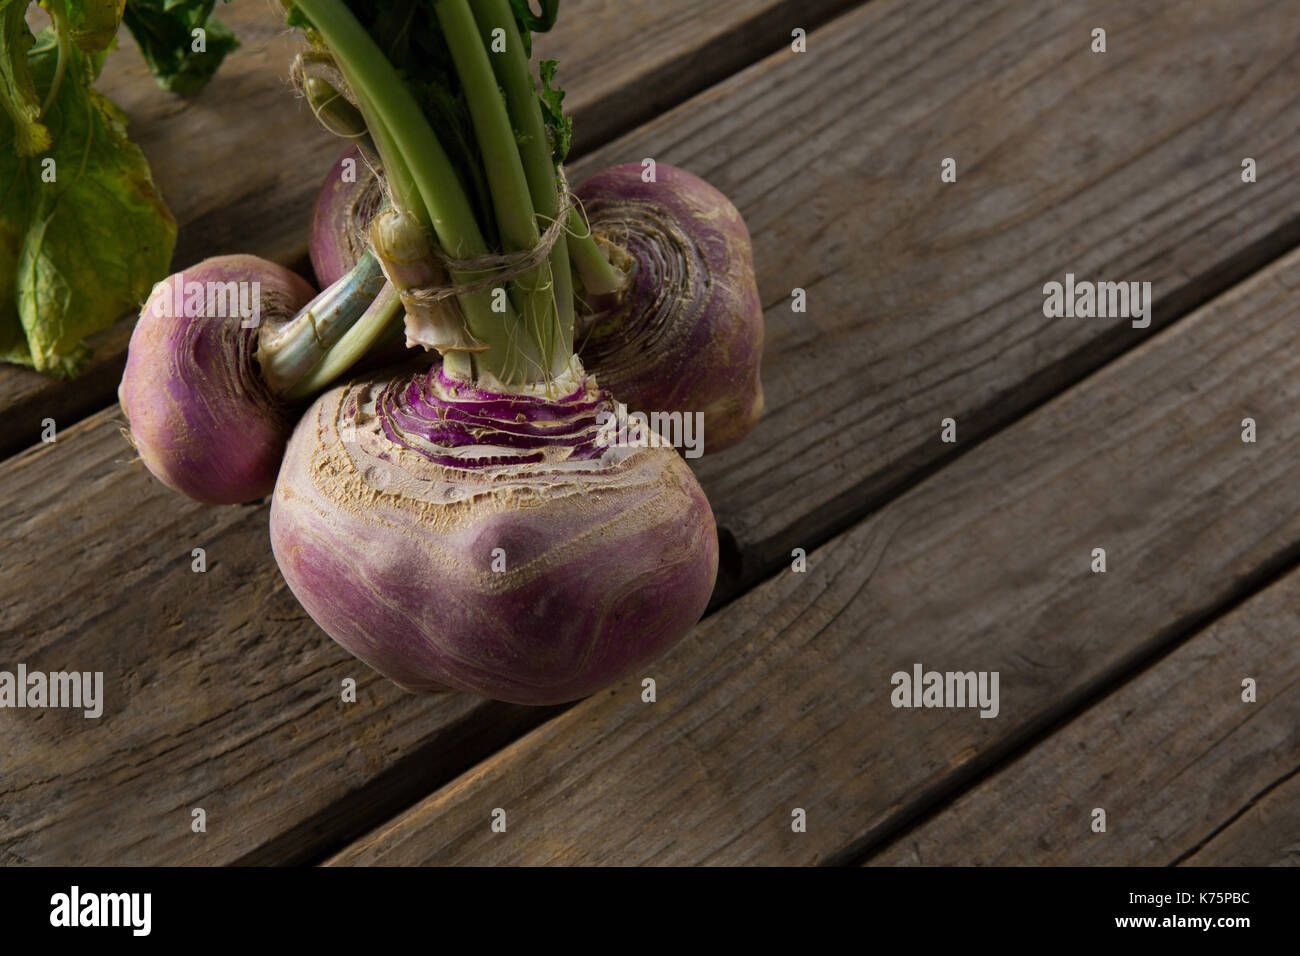 Close-up of turnip on wooden table Stock Photo